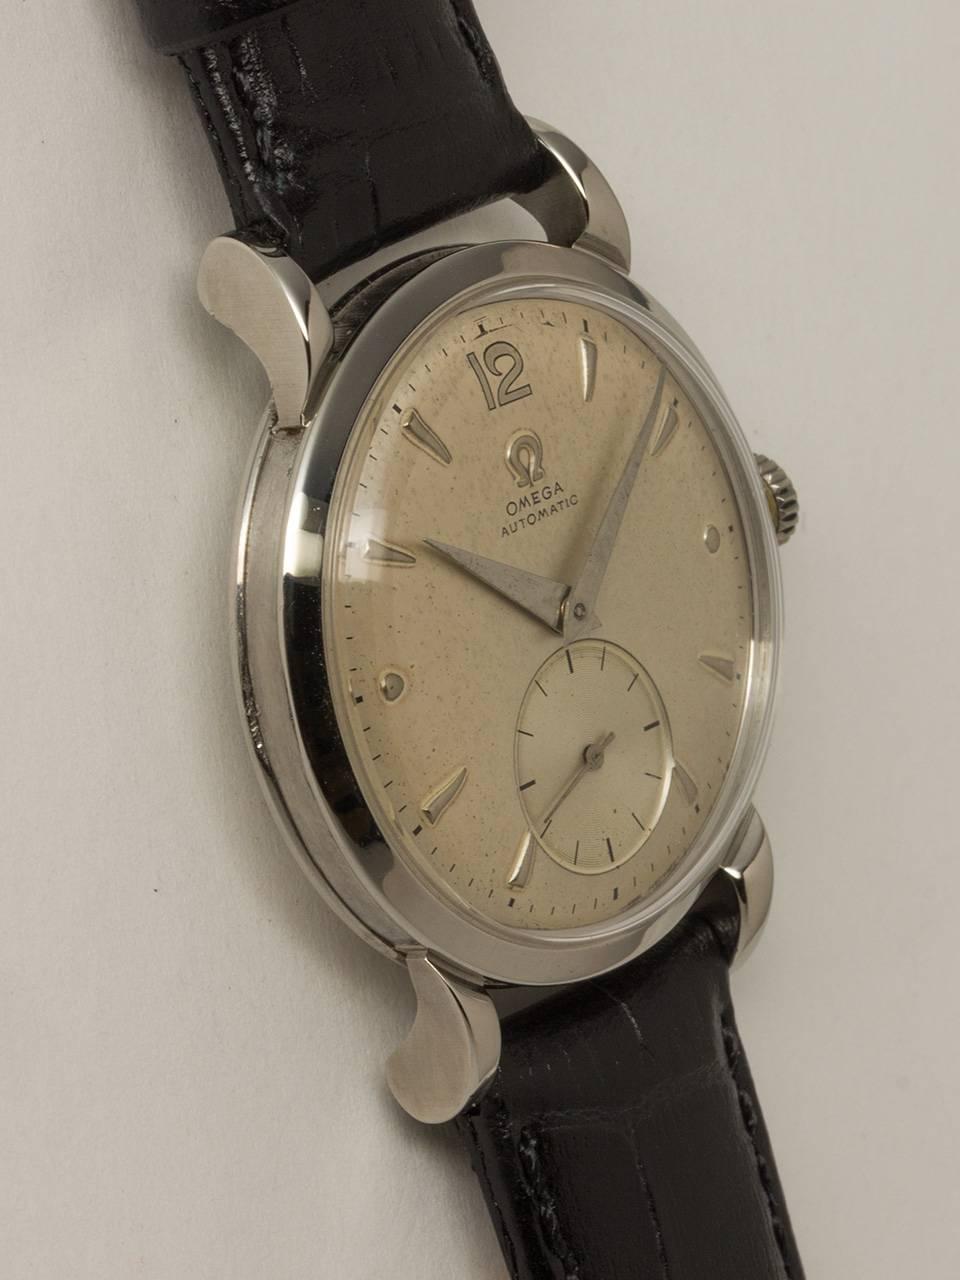 Omega Stainless Steel Automatic Wristwatch ref 2402 movement serial number 11.5 million circa 1950. 33 x 40mm case with tear drop lugs smooth bezel and acrylic crystal. Very pleasing original matte 2 tone silvered dial with raised silver markers and